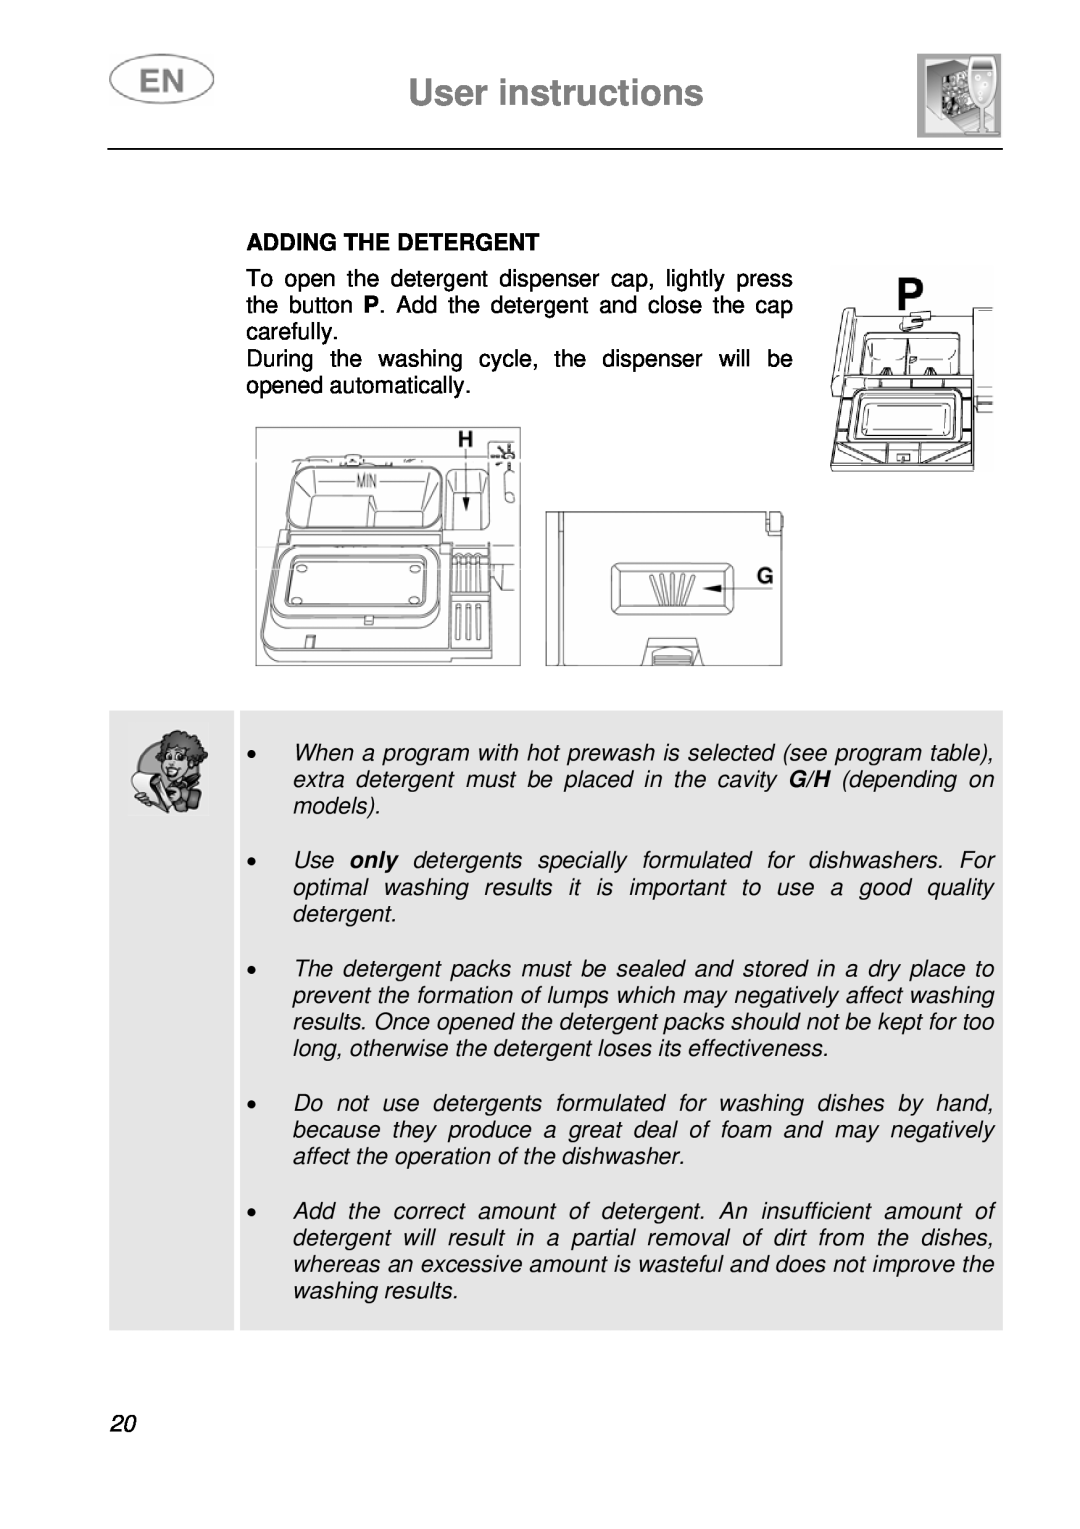 Smeg DI612A1 User instructions, Adding The Detergent, During the washing cycle, the dispenser will be opened automatically 